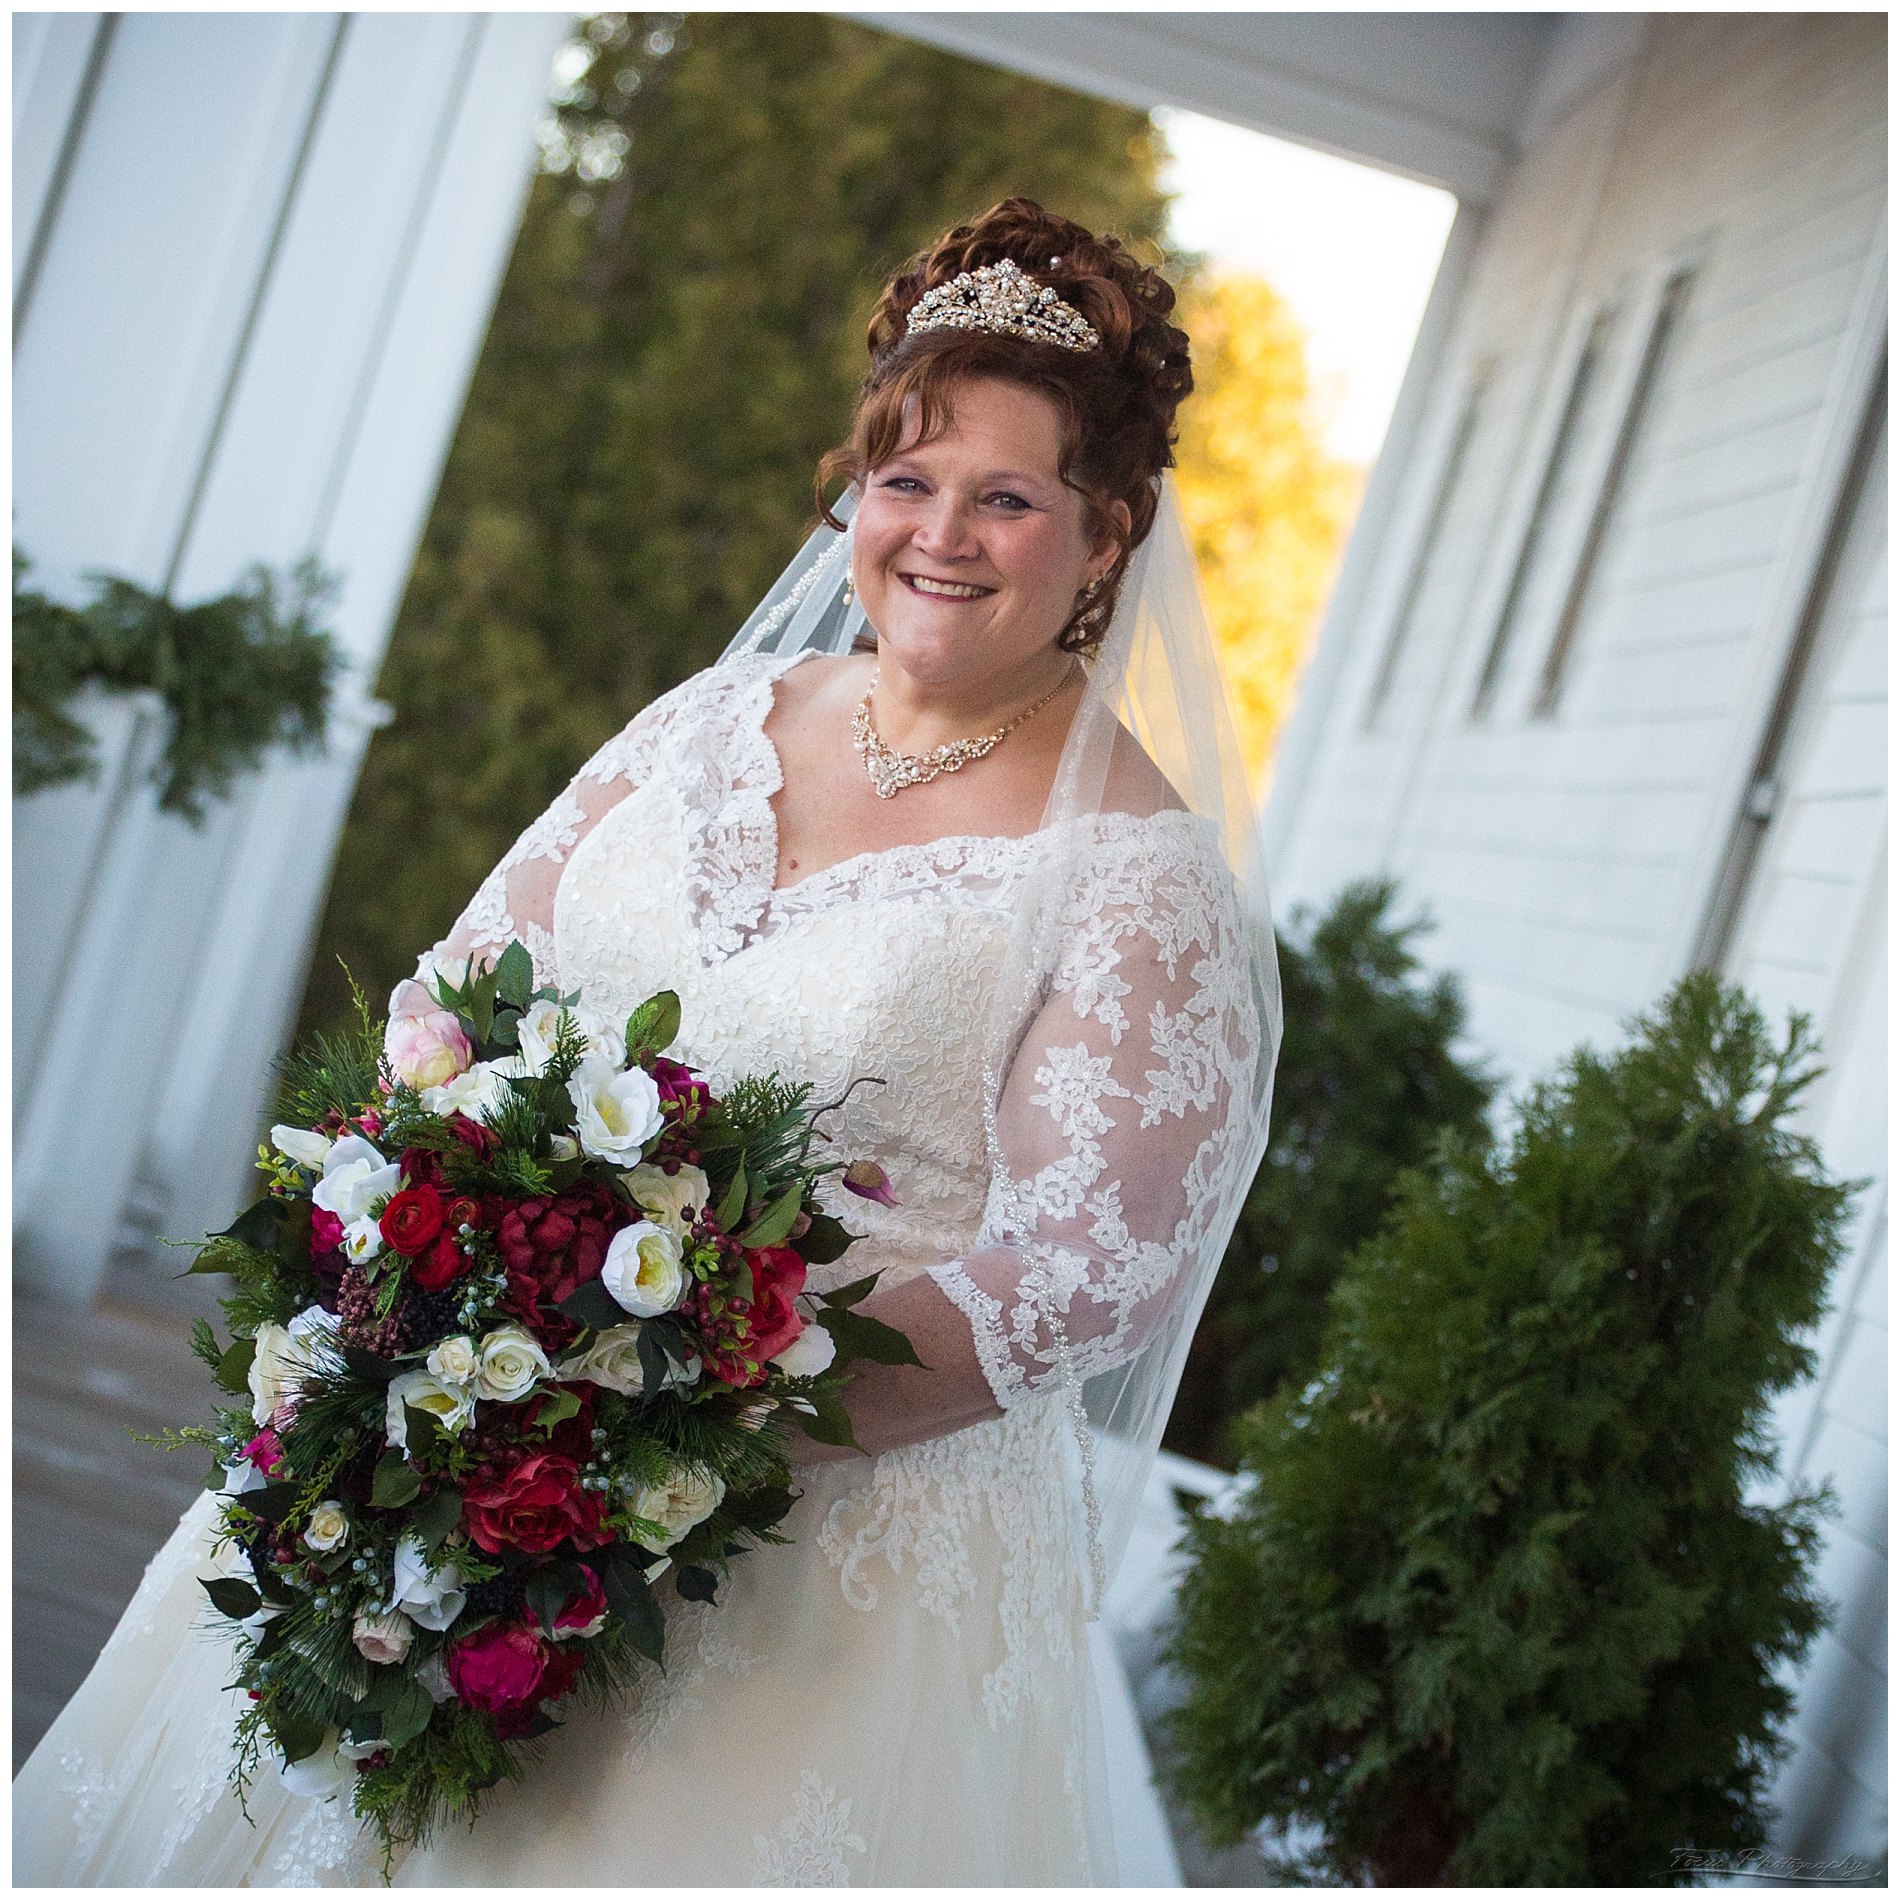 Heather's bouquet from Jardiniere was perfect for a Christmas wedding!